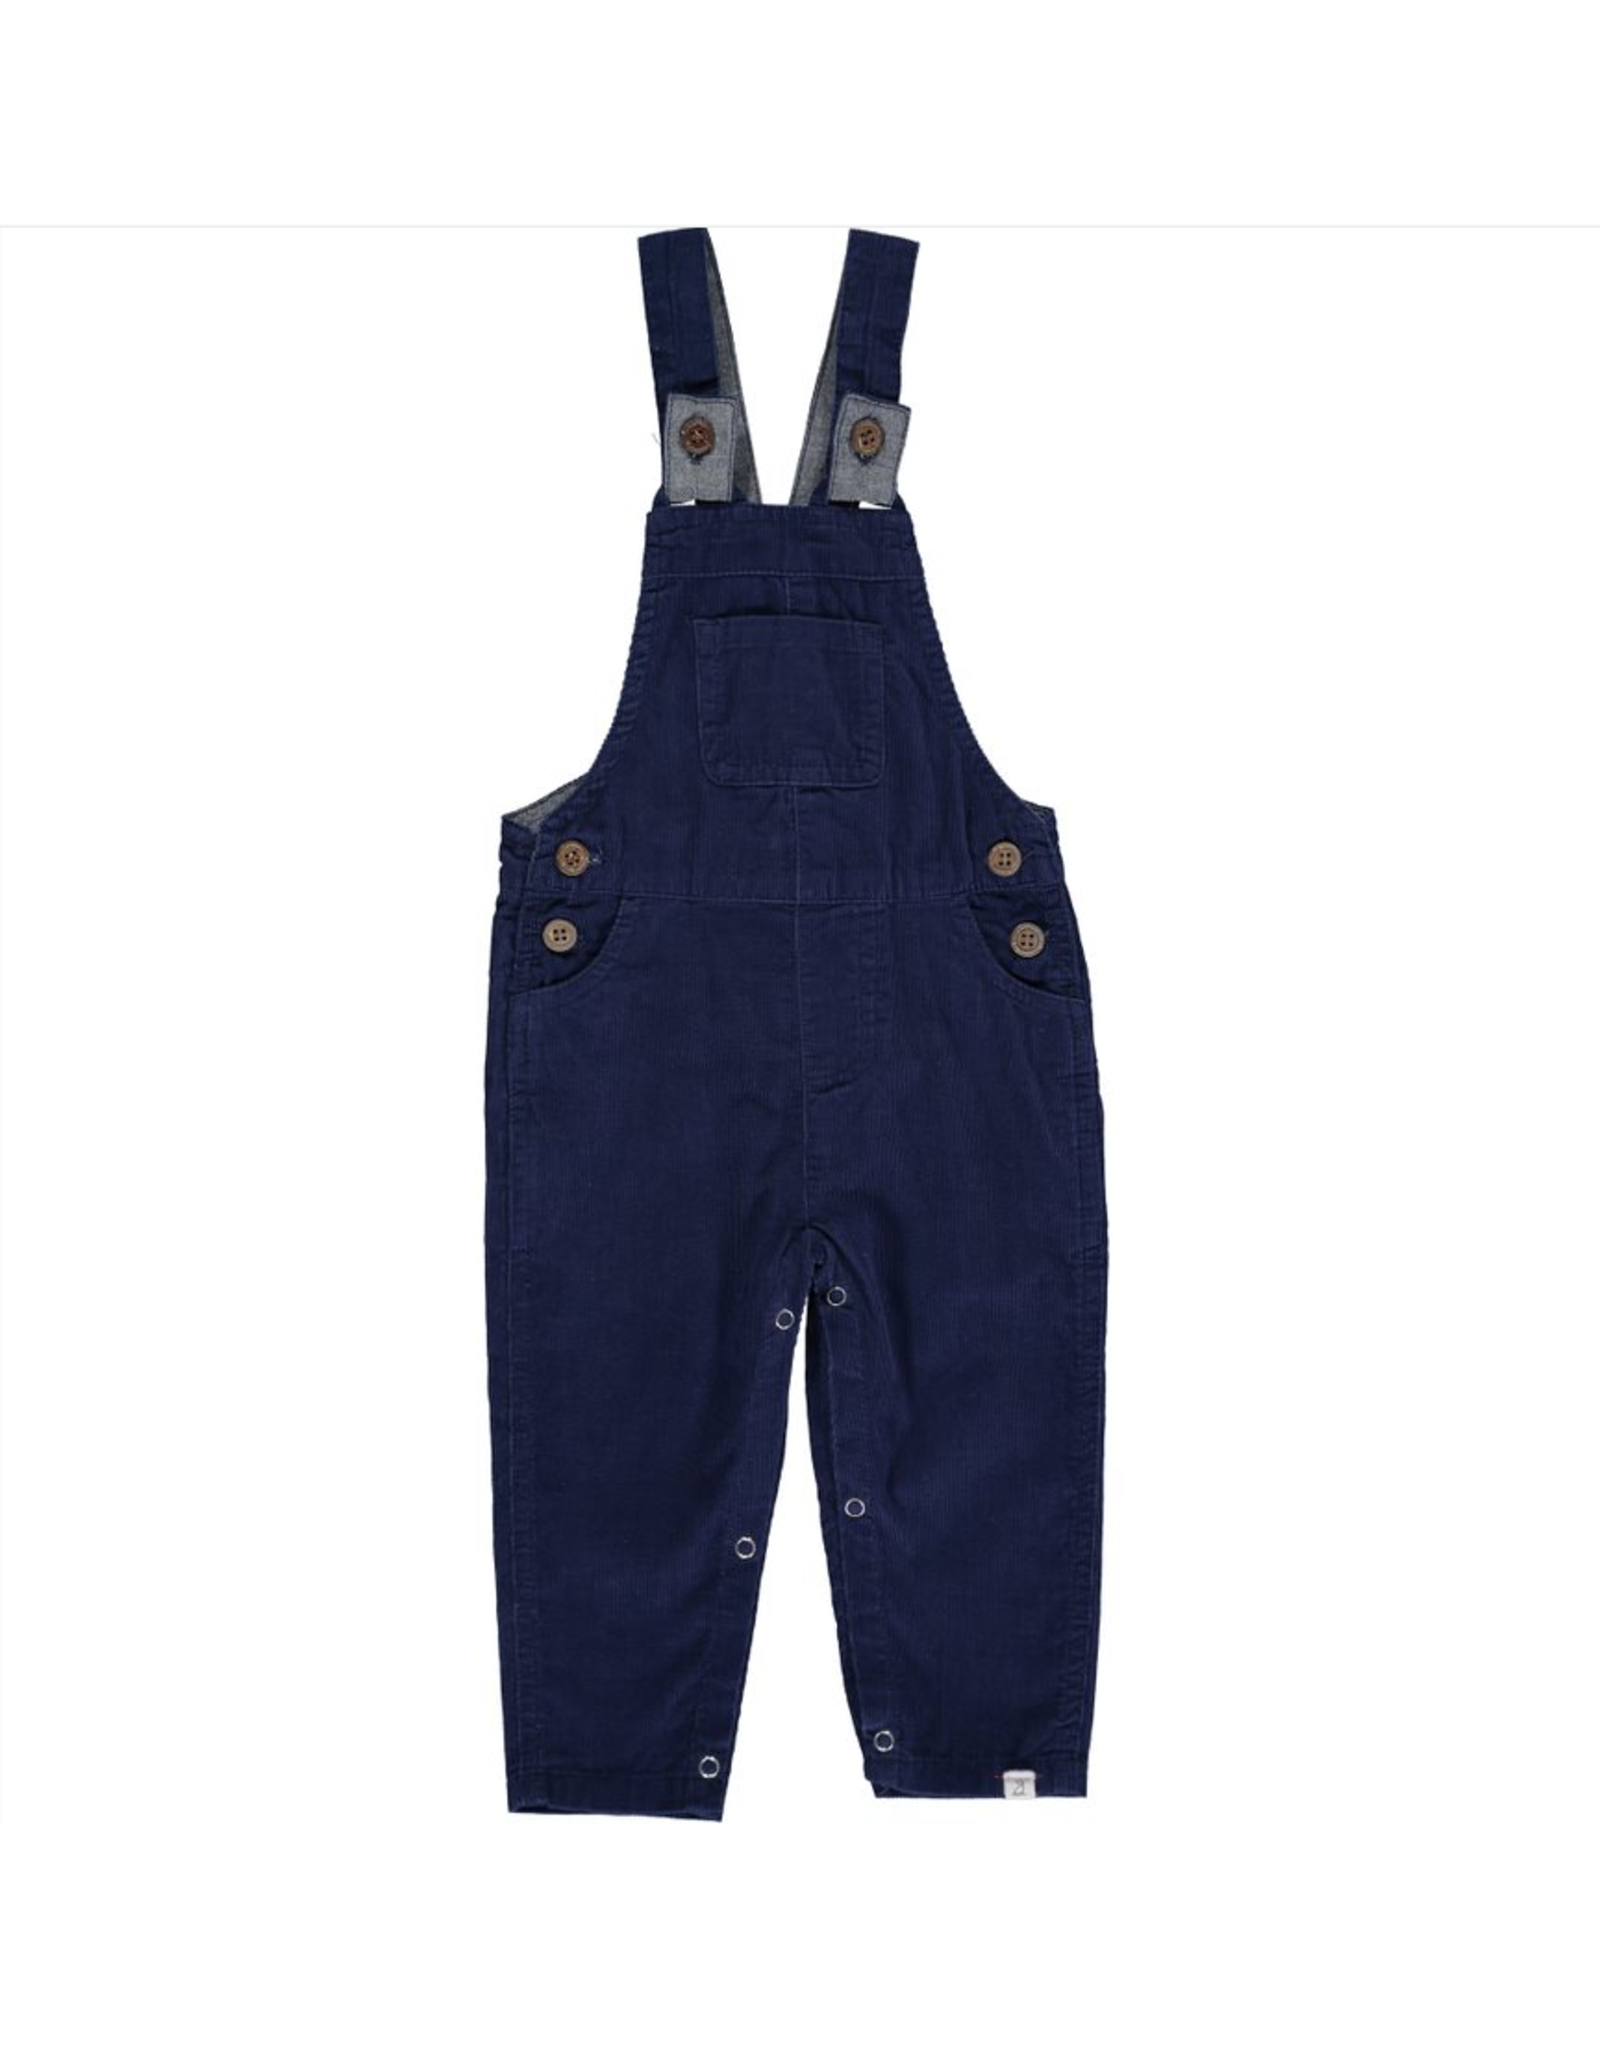 Me & Henry Harrison Navy Cord  Overalls